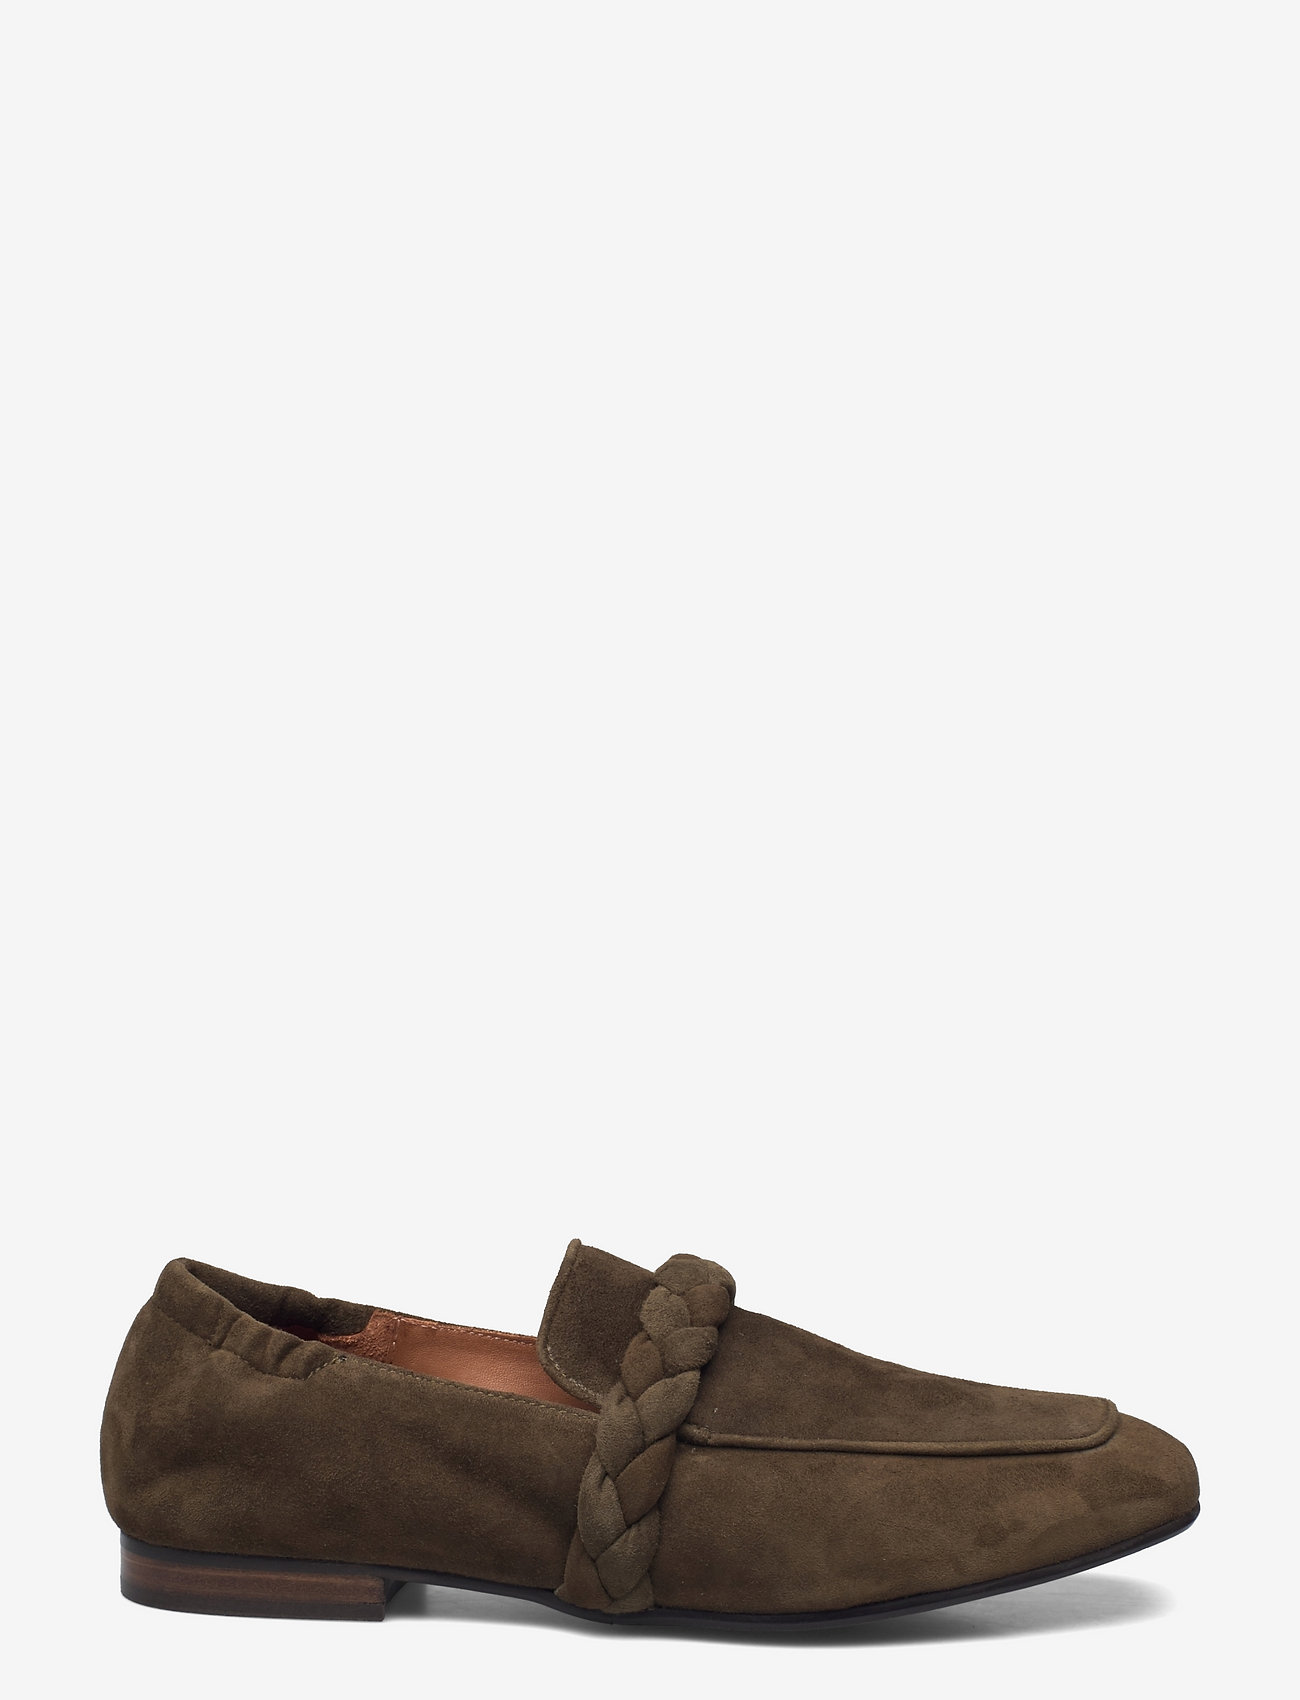 Billi Bi - Shoes A1924 - loafers - army suede 57 - 1